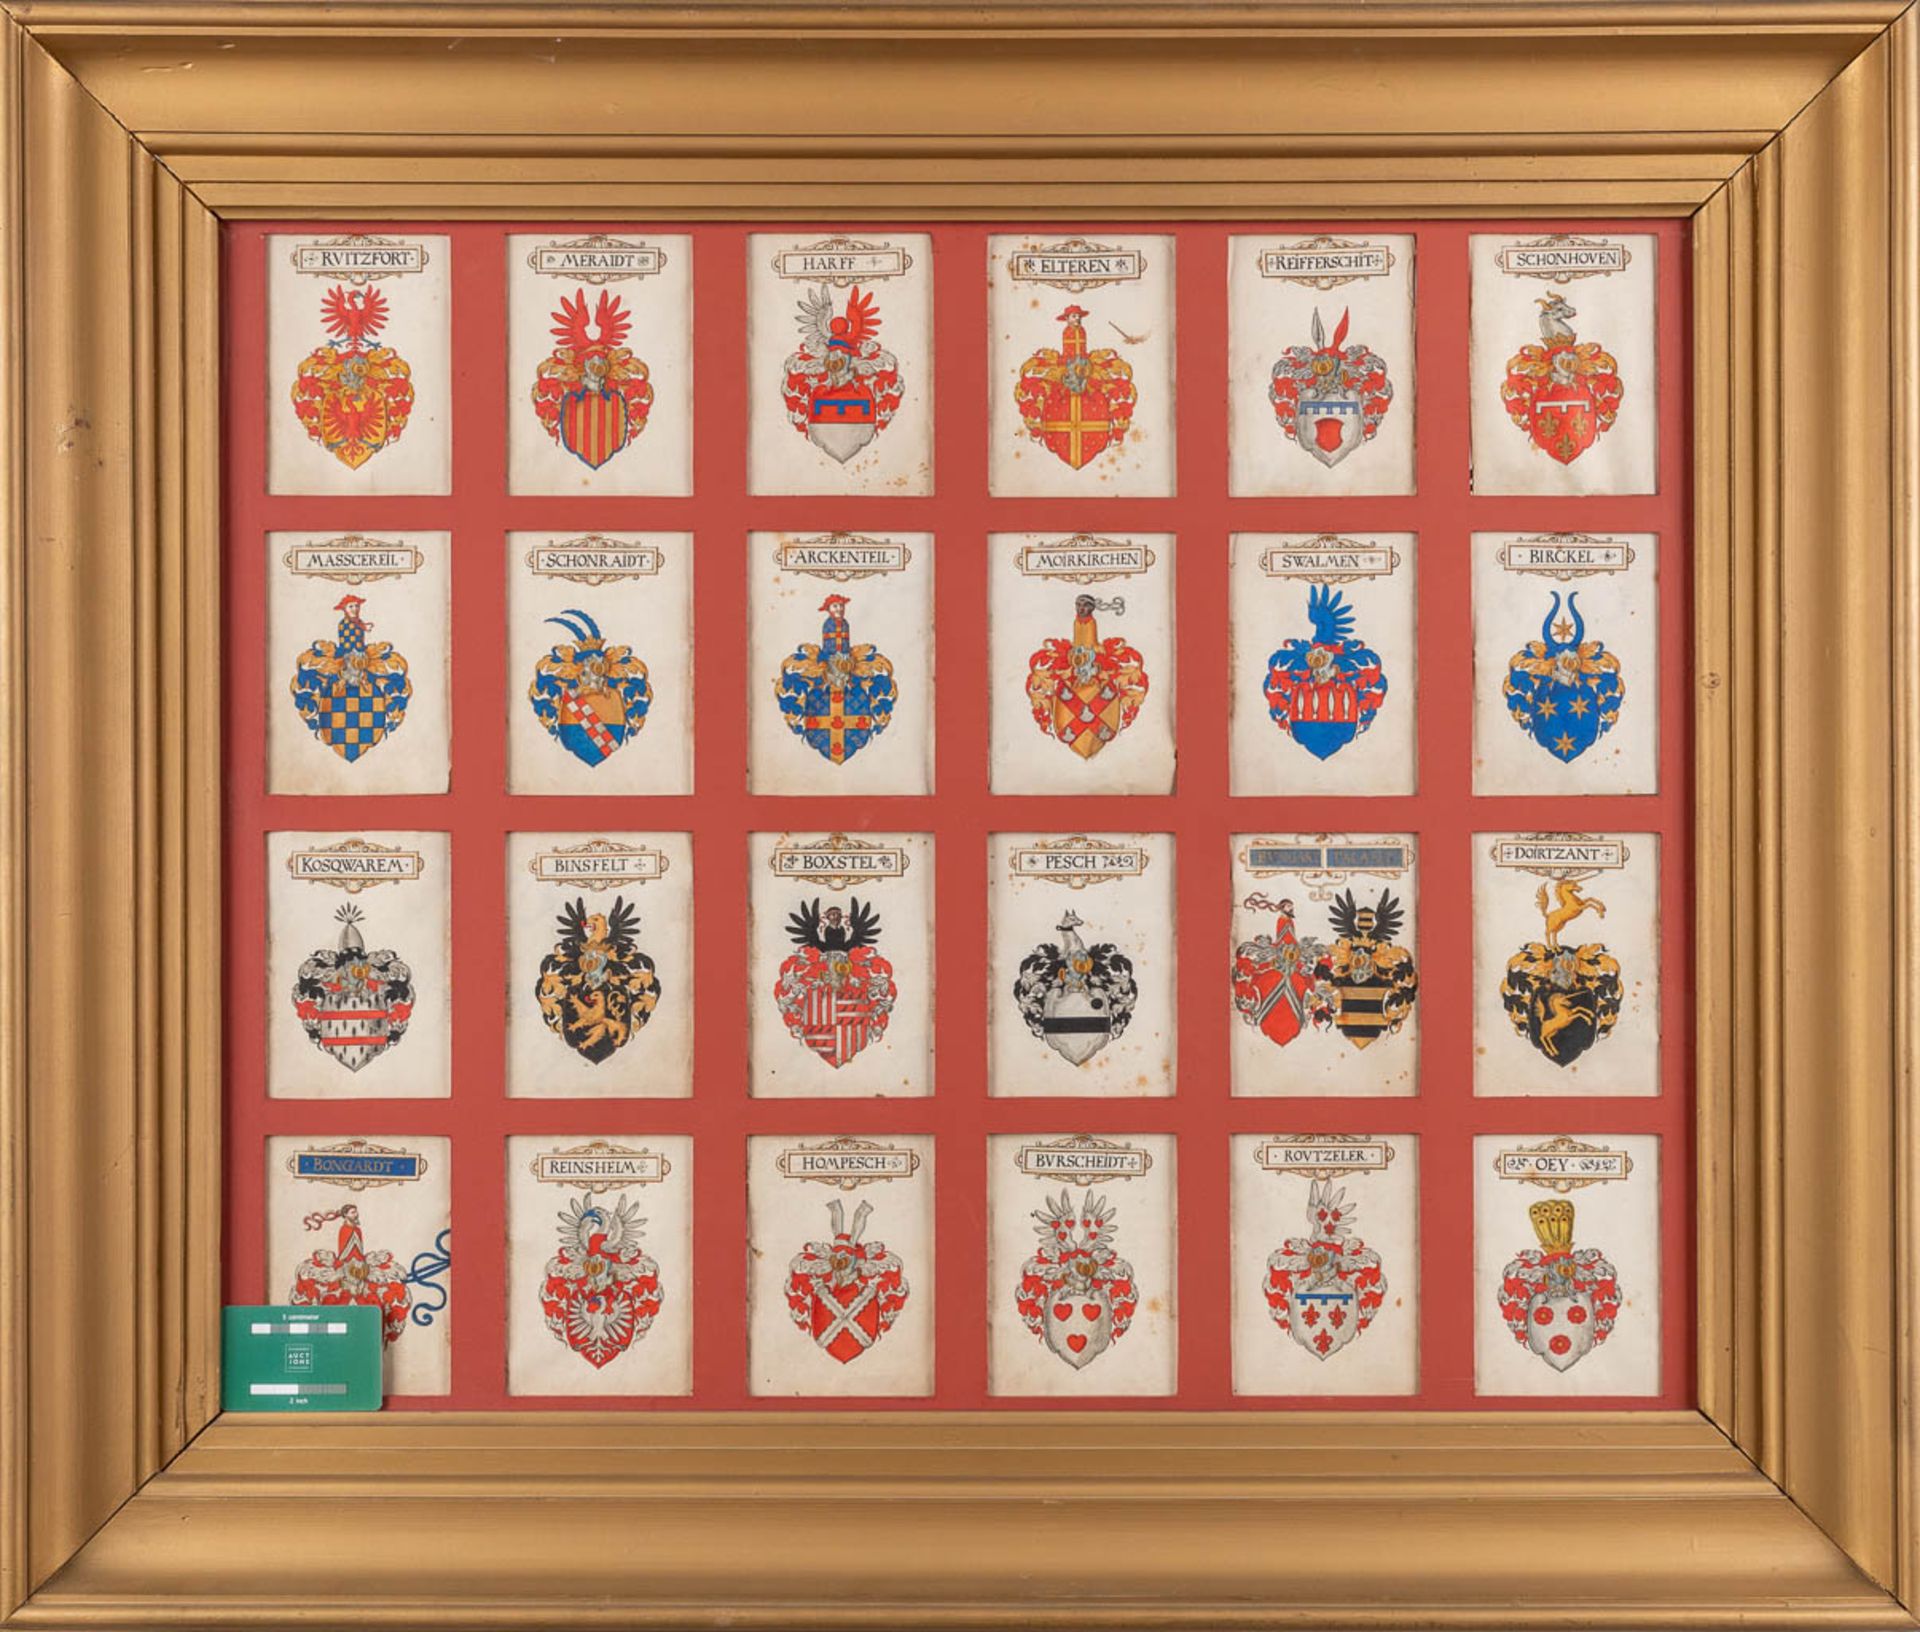 A frame with 24 hand-painted family crests and coat of arms , oil on paper. (W:98 x H:83 cm) - Image 2 of 9